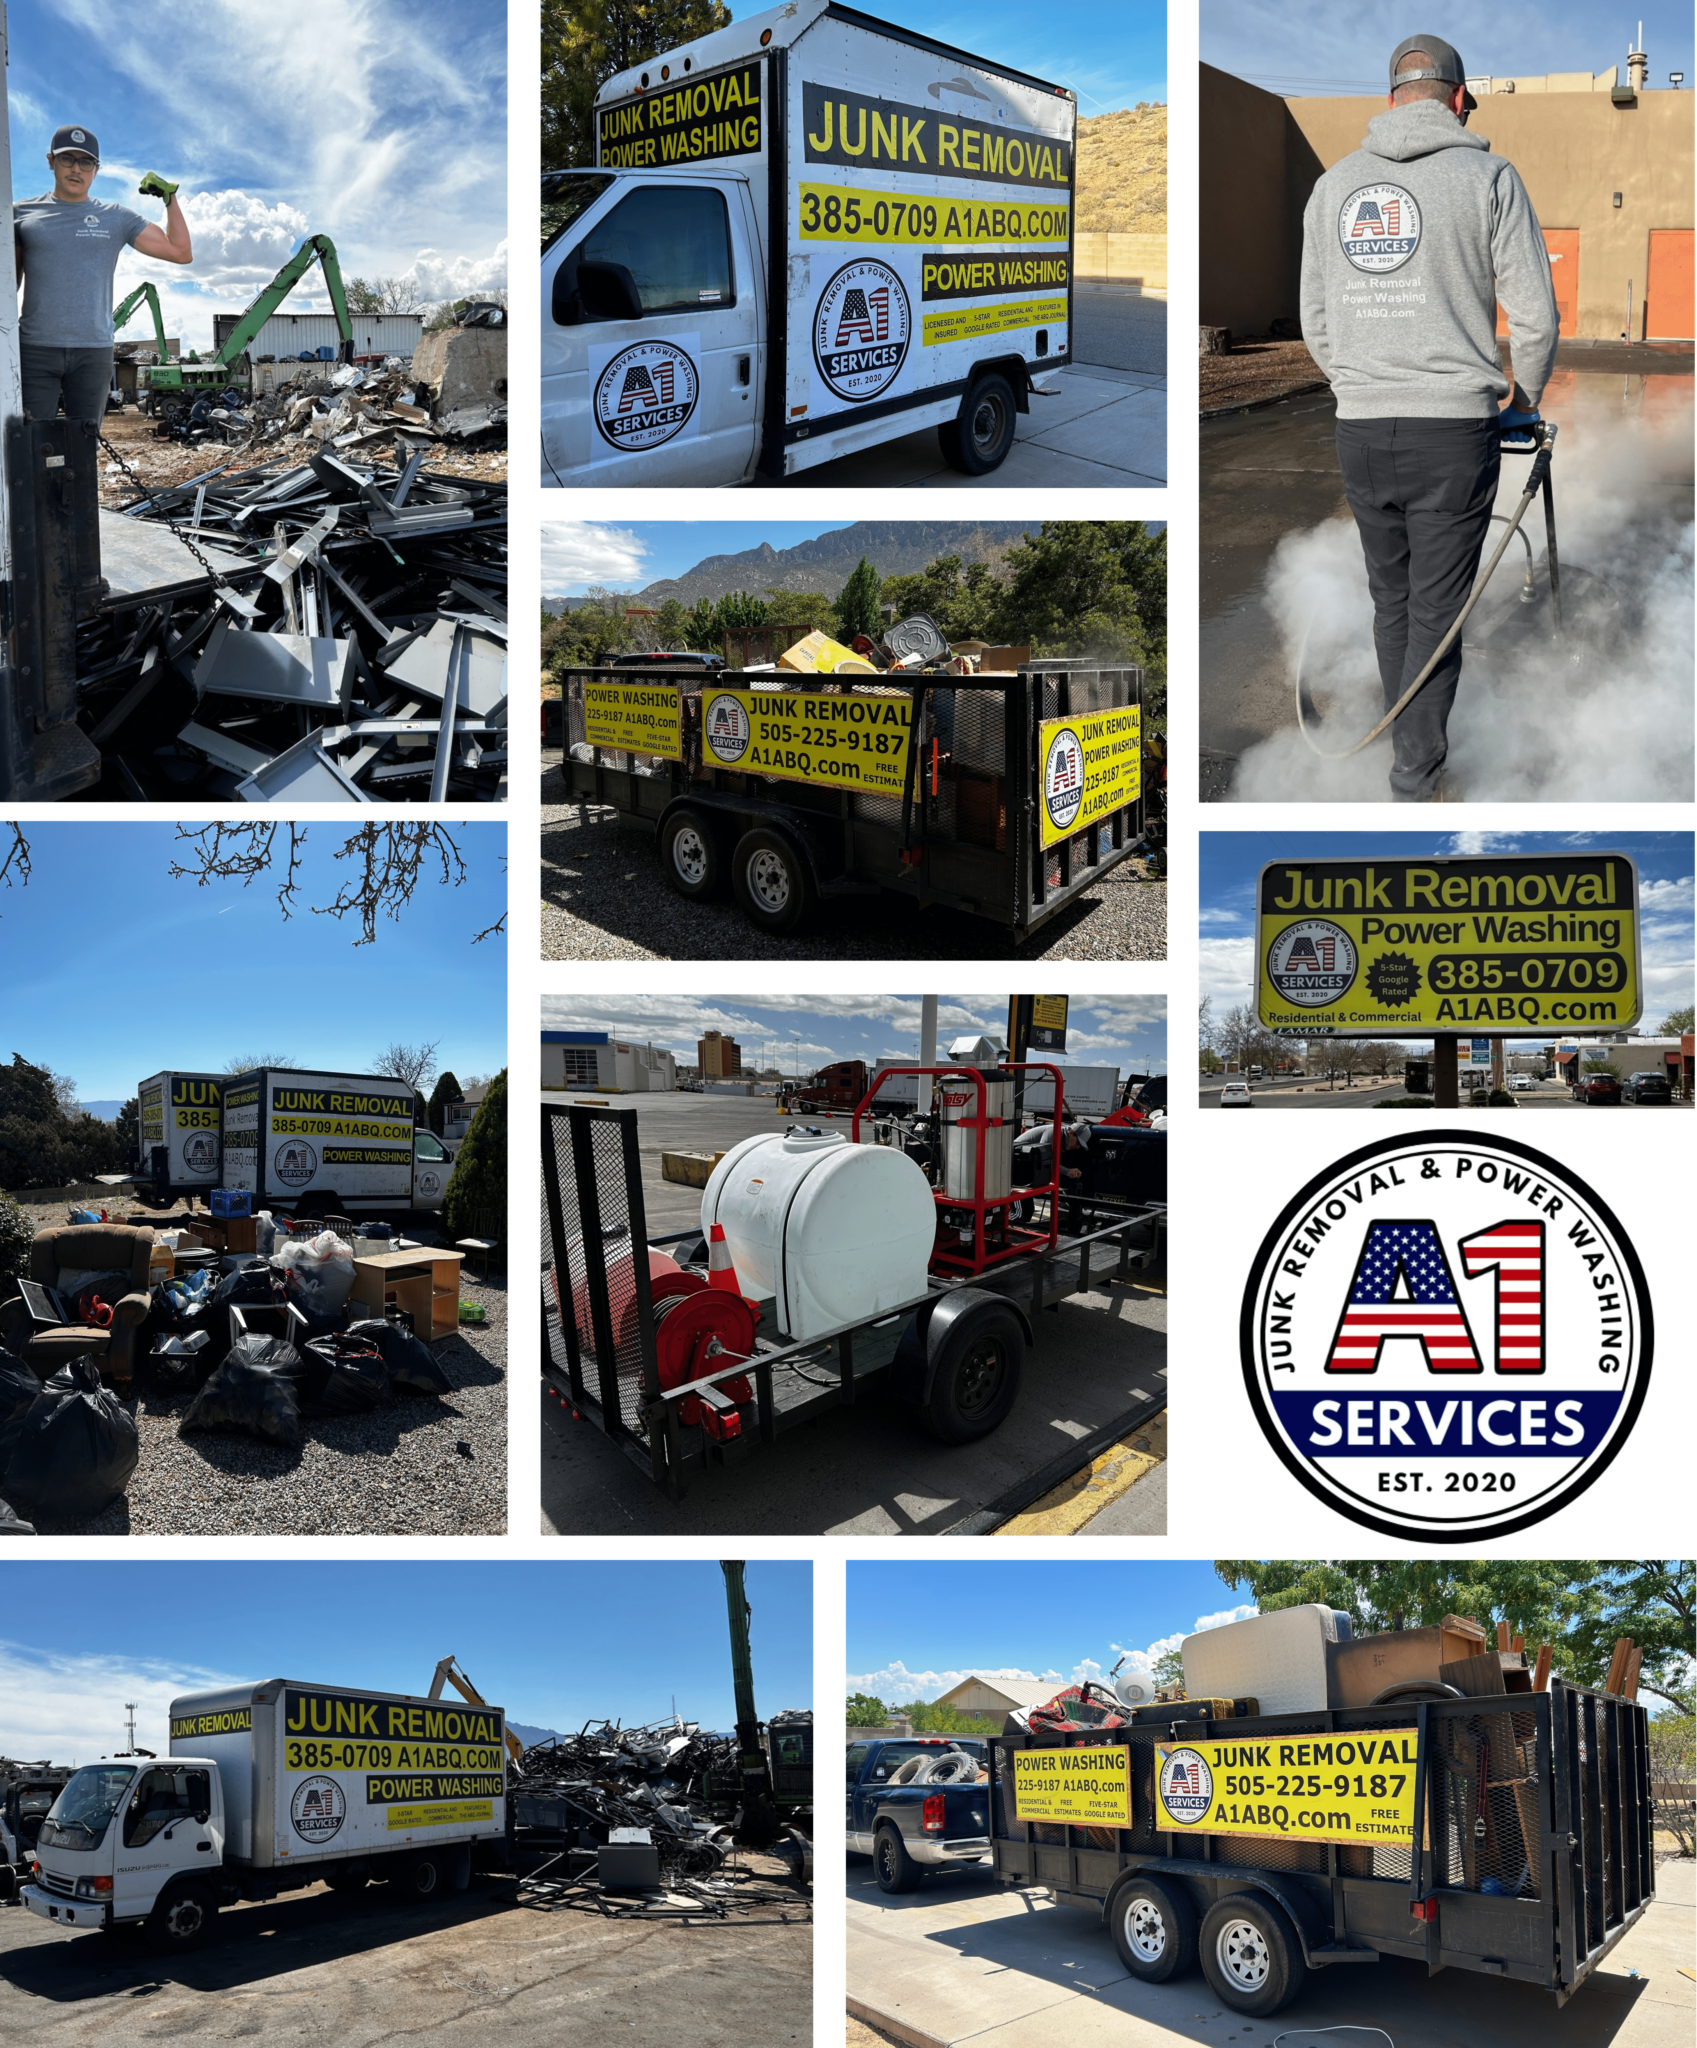 A1 Services Junk Removal and Pressure Washing in Albuquerque